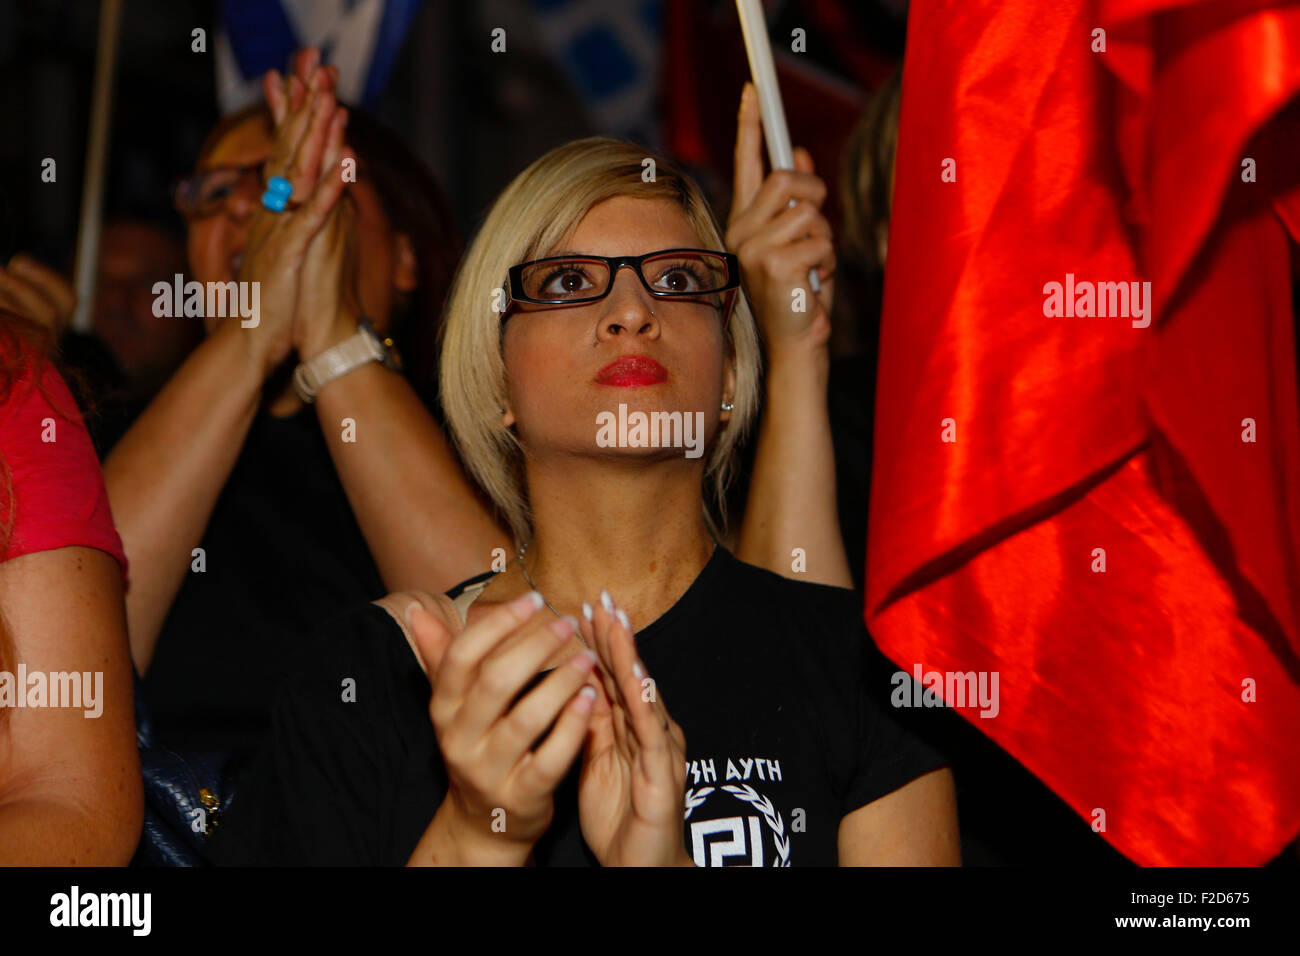 Athens, Greece. 16th Sep, 2015. A Golden Dawn supporter listens to a speech at the election rally in Athens Greek right wing party Golden Dawn held an election rally in Athens, four days ahead of election day. The party hopes to gain enough seats in the election to become the third latest party in the Greek Parliament. Credit:  Michael Debets/Pacific Press/Alamy Live News Stock Photo